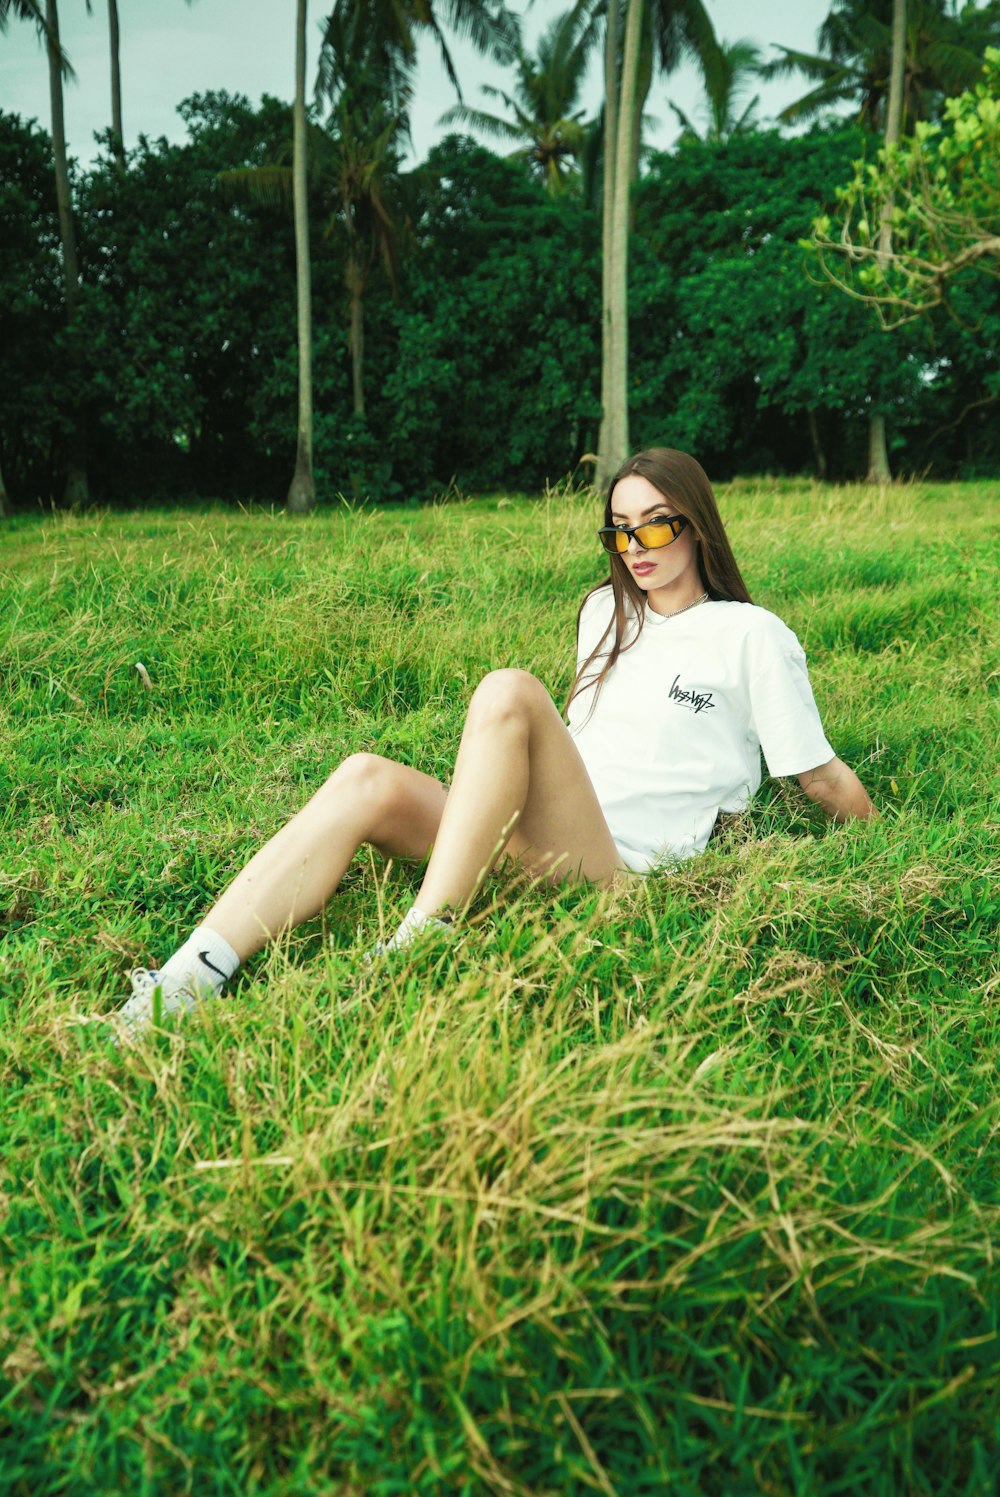 a woman sitting in the grass wearing sunglasses